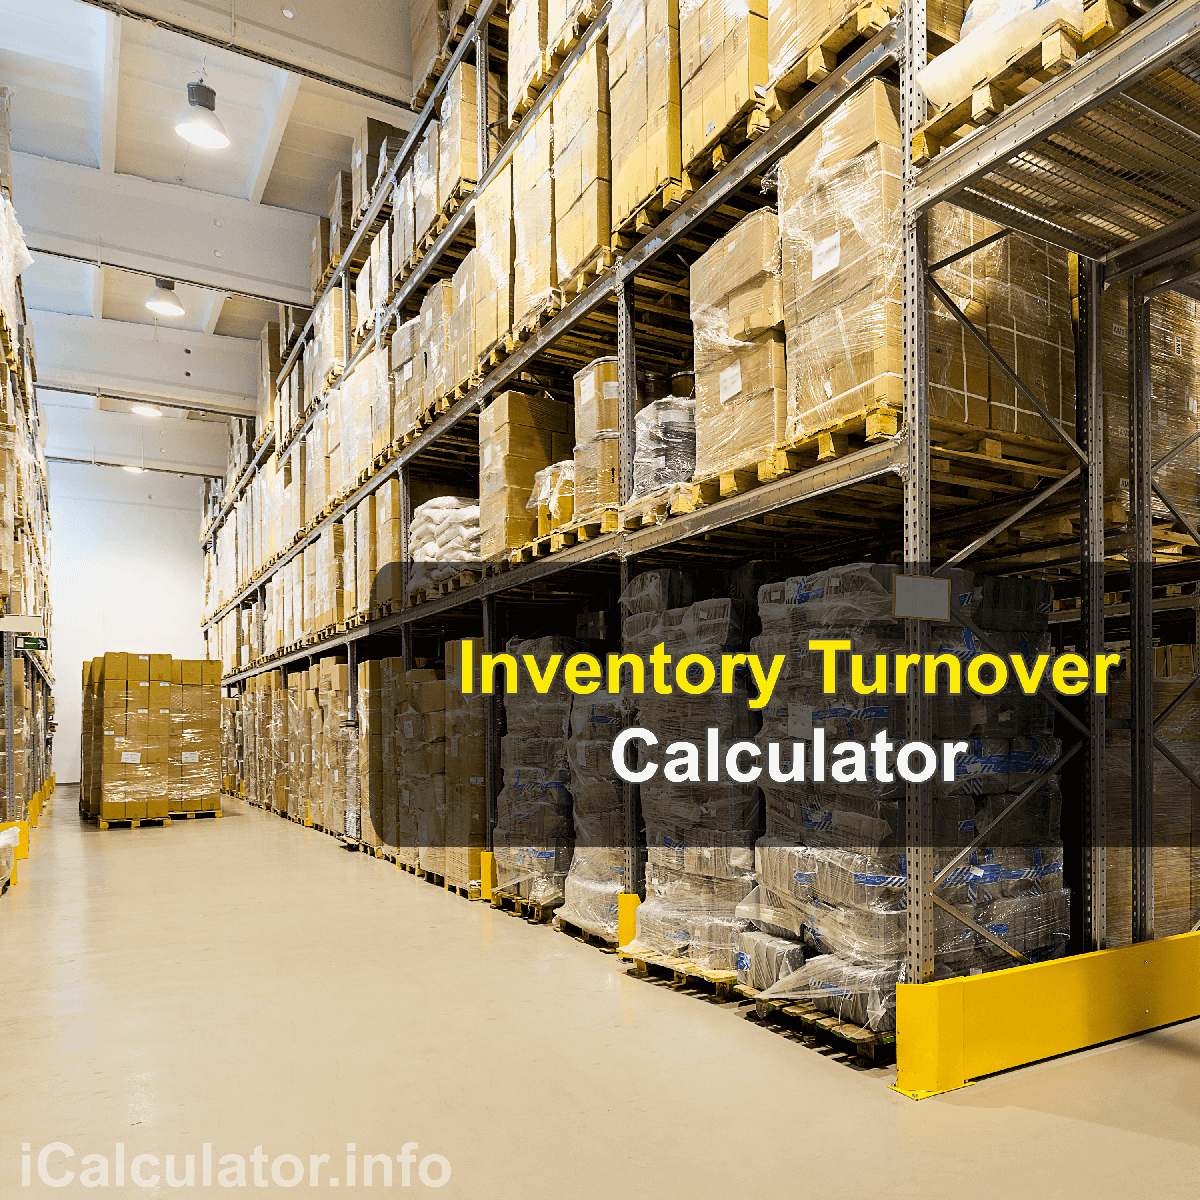 Inventory Turnover Calculator. This image provides details of how to calculate inventory turnover product using a good calculator and notepad. By using the either of the inventory turnover and inventory management formulas, the Inventory Turnover Calculator provides a true calculation of how many times you have sold your inventory in a defined period.